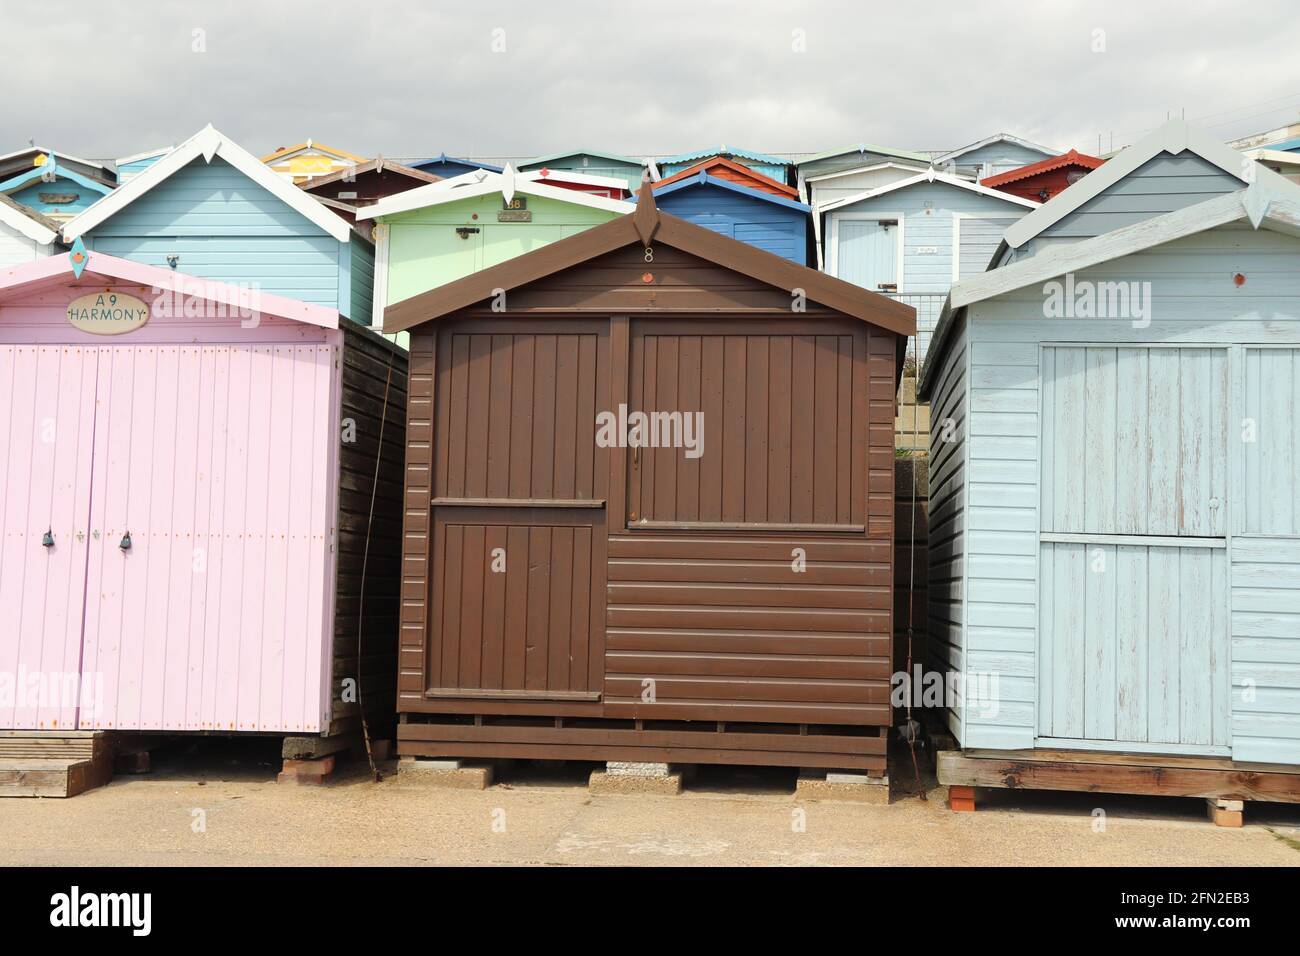 Colourful Beach huts at walton On The Naze Essex UK Stock Photo